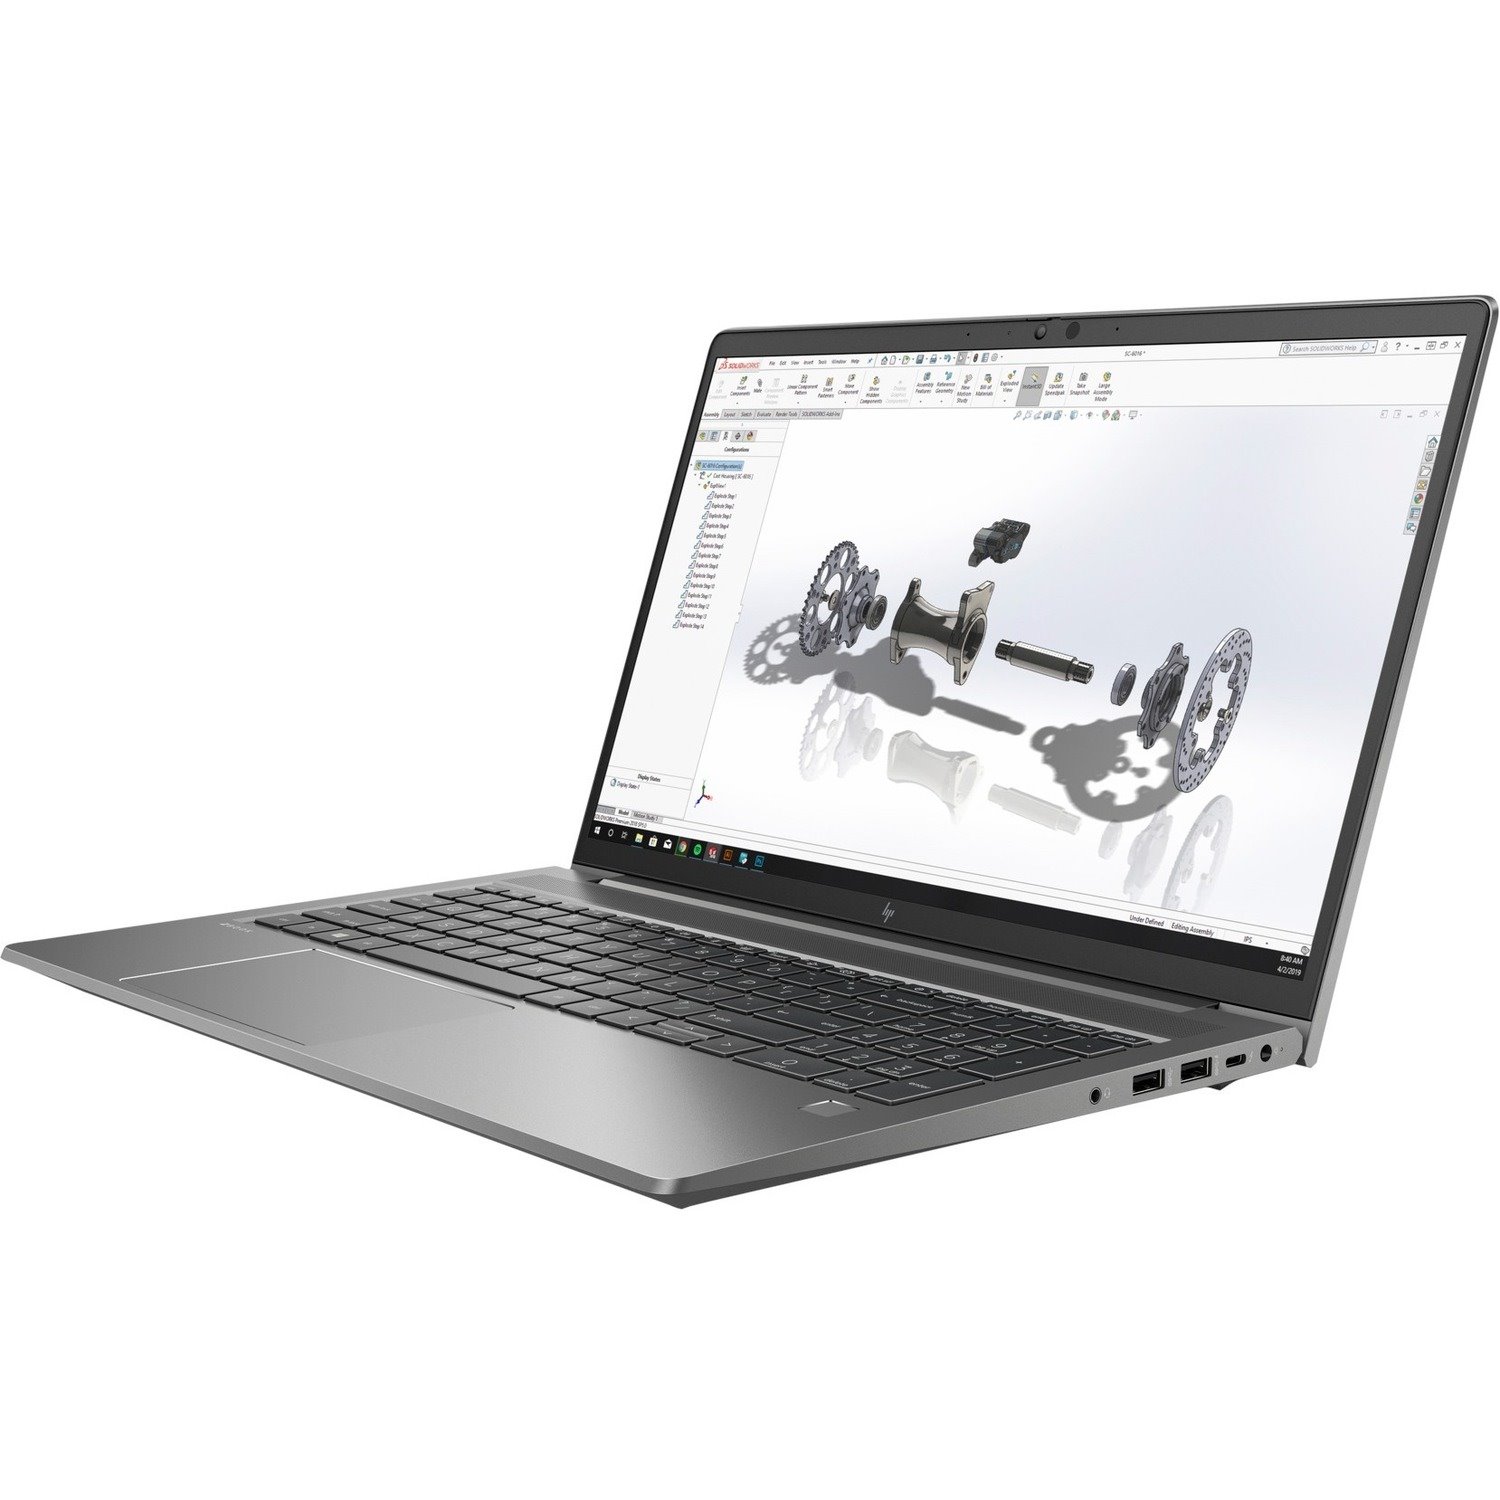 HP ZBook Power G8 39.6 cm (15.6") Rugged Mobile Workstation - Full HD - 1920 x 1080 - Intel Core i7 11th Gen i7-11800H Octa-core (8 Core) 2.30 GHz - 16 GB Total RAM - 512 GB SSD